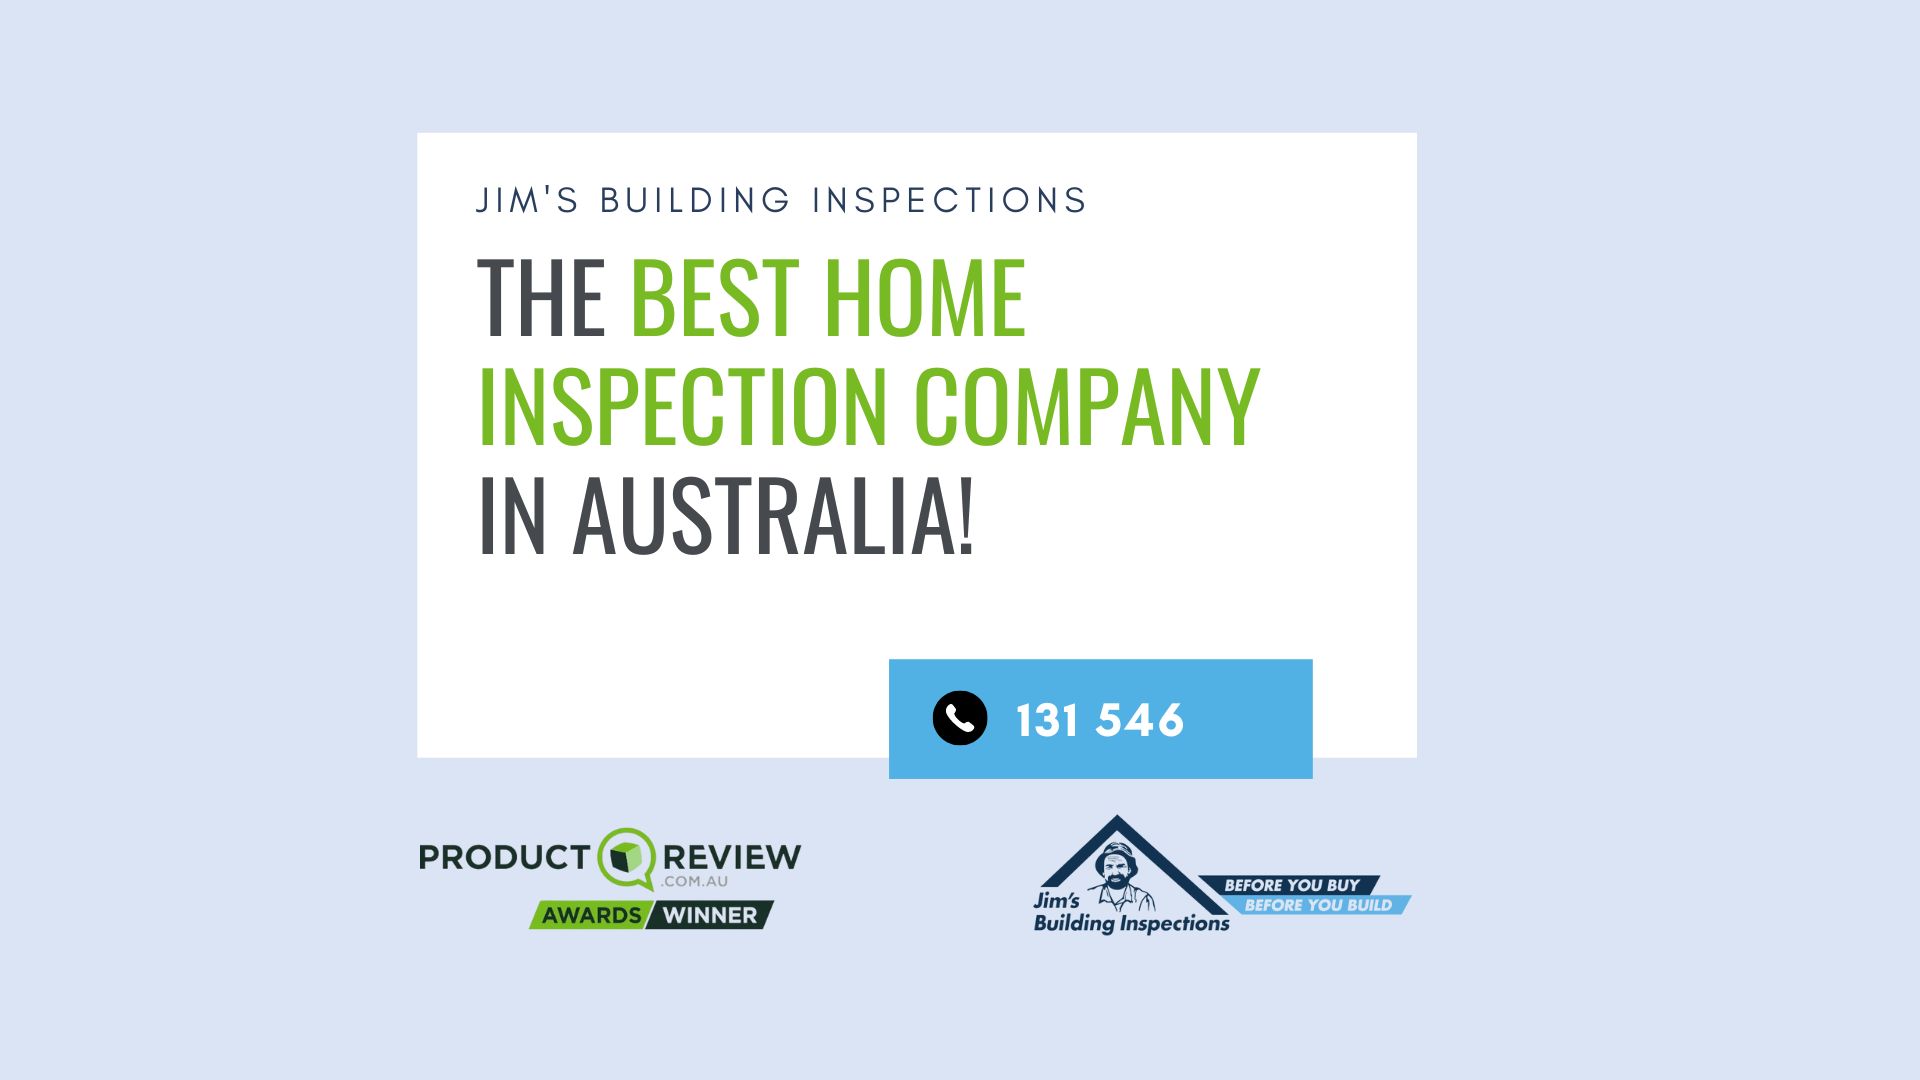 Jim’s Building Inspections Named ‘Best Home Inspection Company’ in Australia